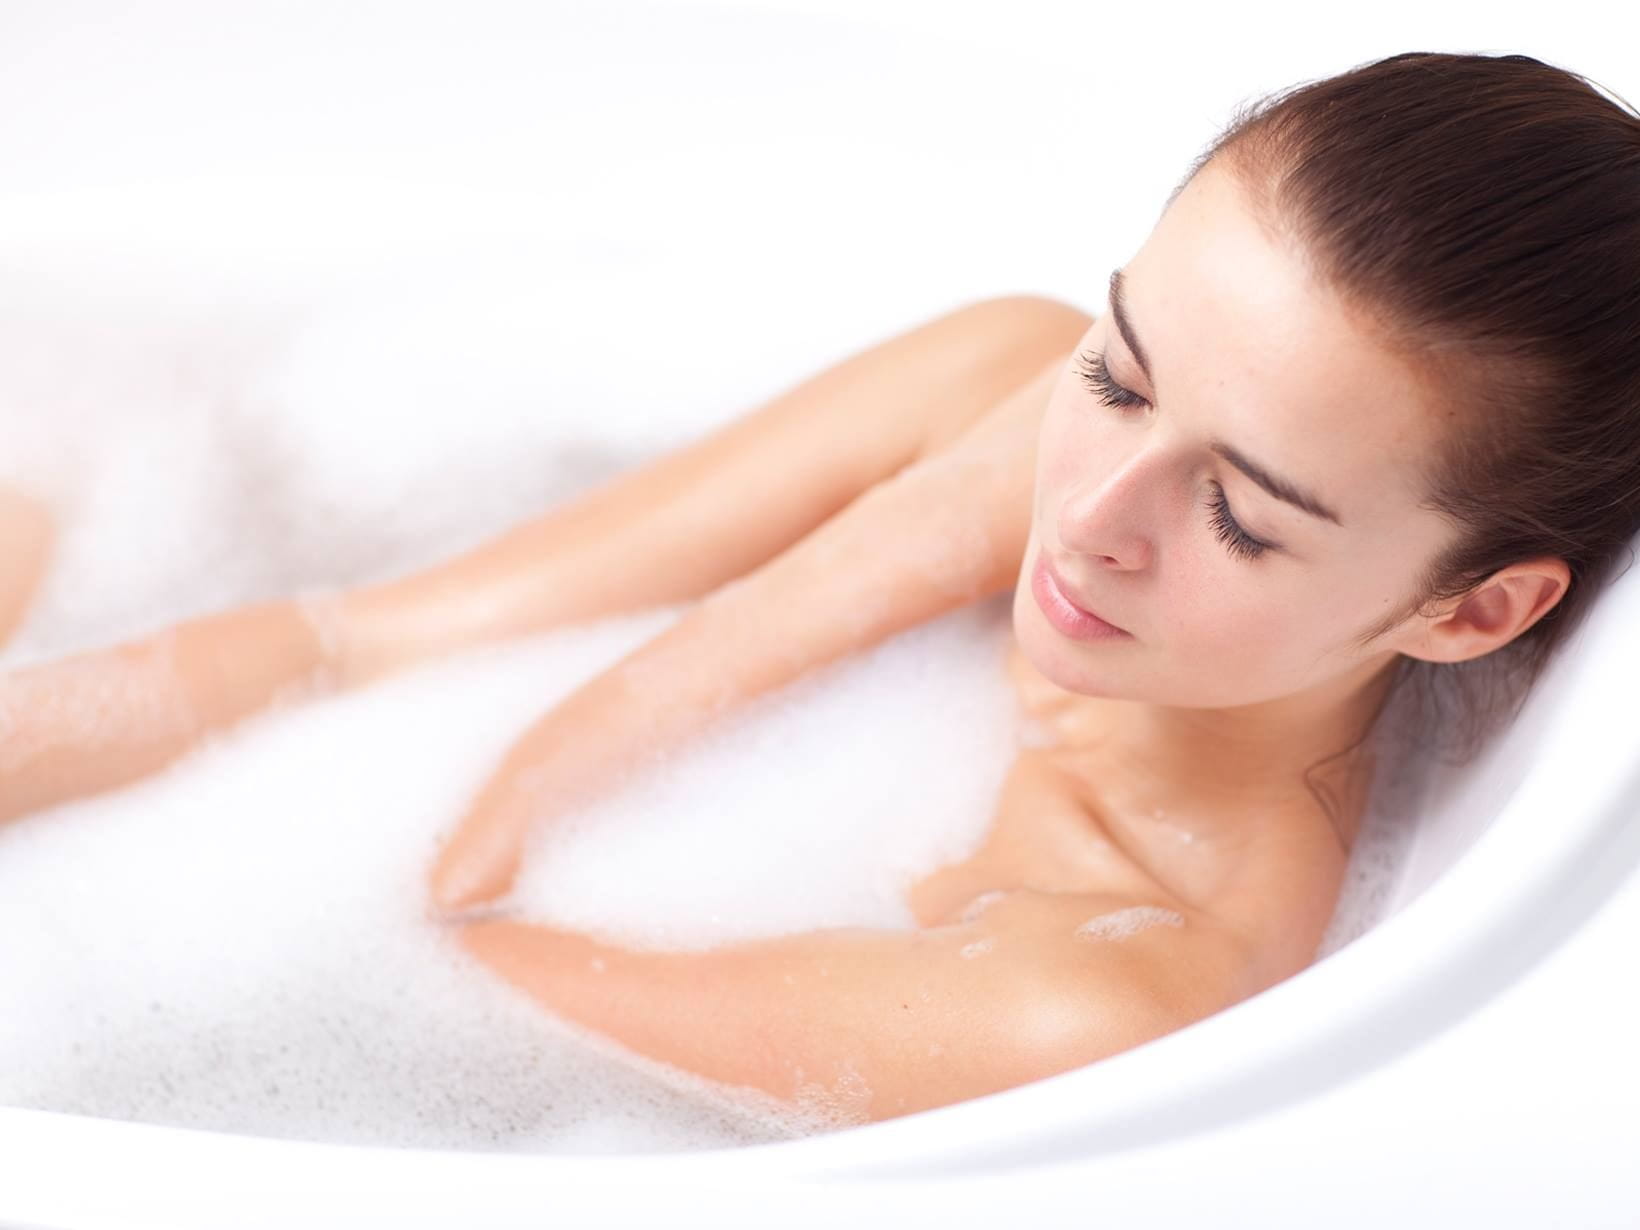 BATHING FOR TOO LONG CAUSES DRY SKIN